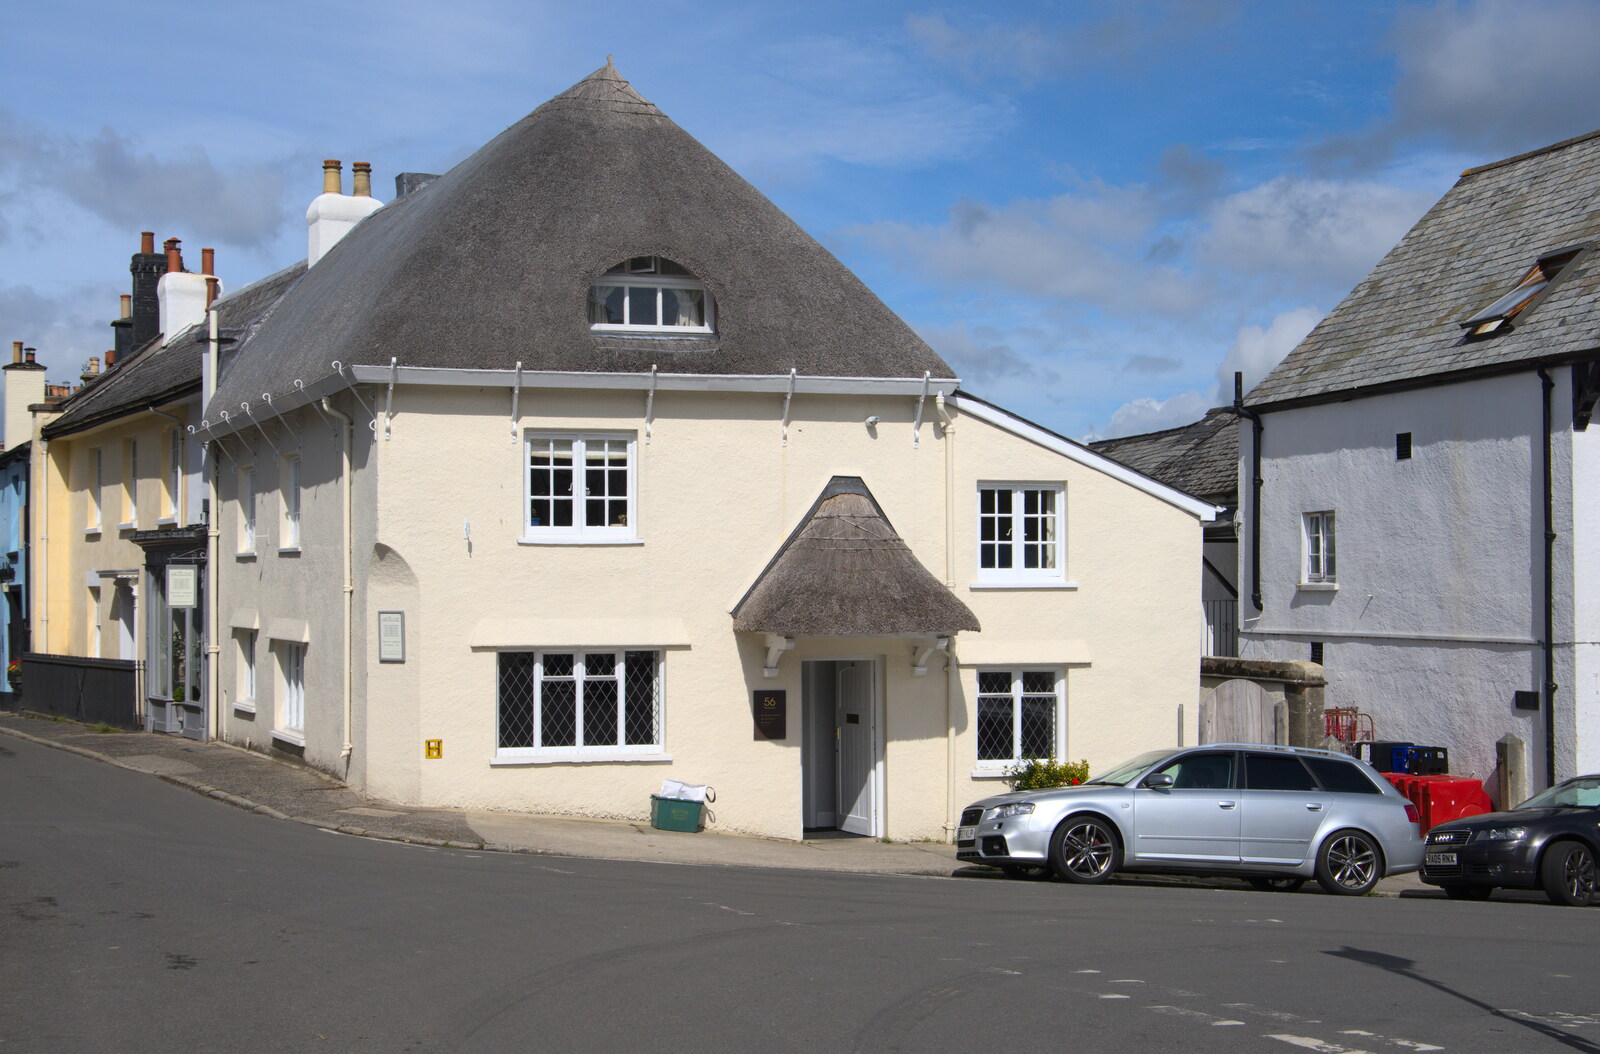 The thatched house that used to be Lloyds Bank from A Game of Cricket, and a Walk Around Chagford, Devon - 23rd August 2020